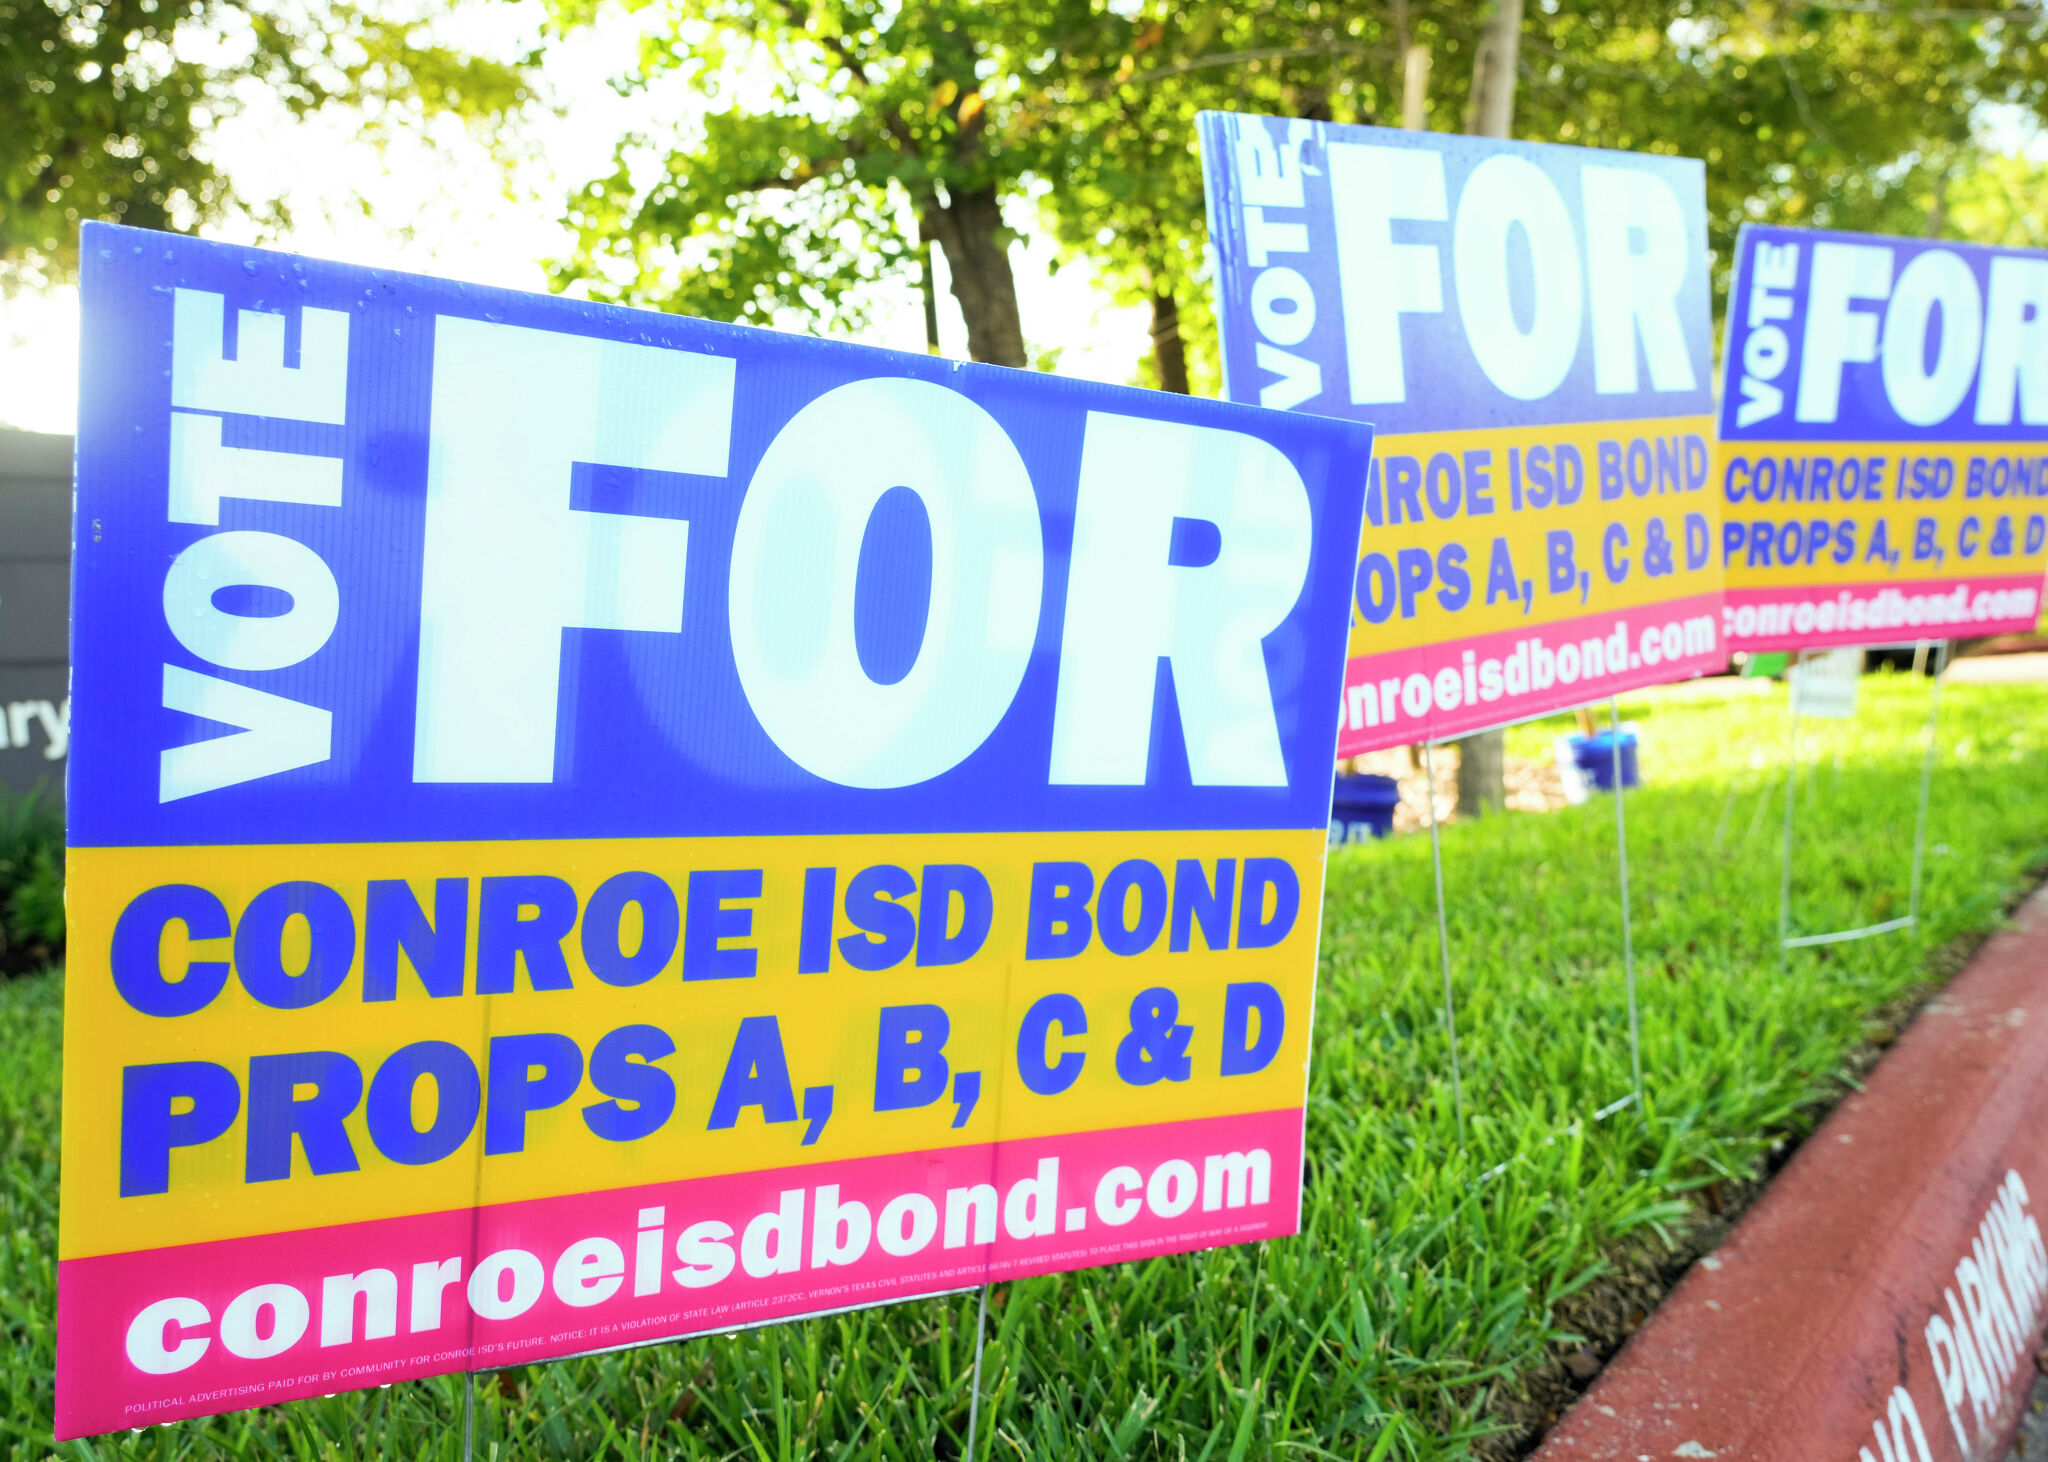 Montgomery County election results Conroe ISD's 1.9B bond package